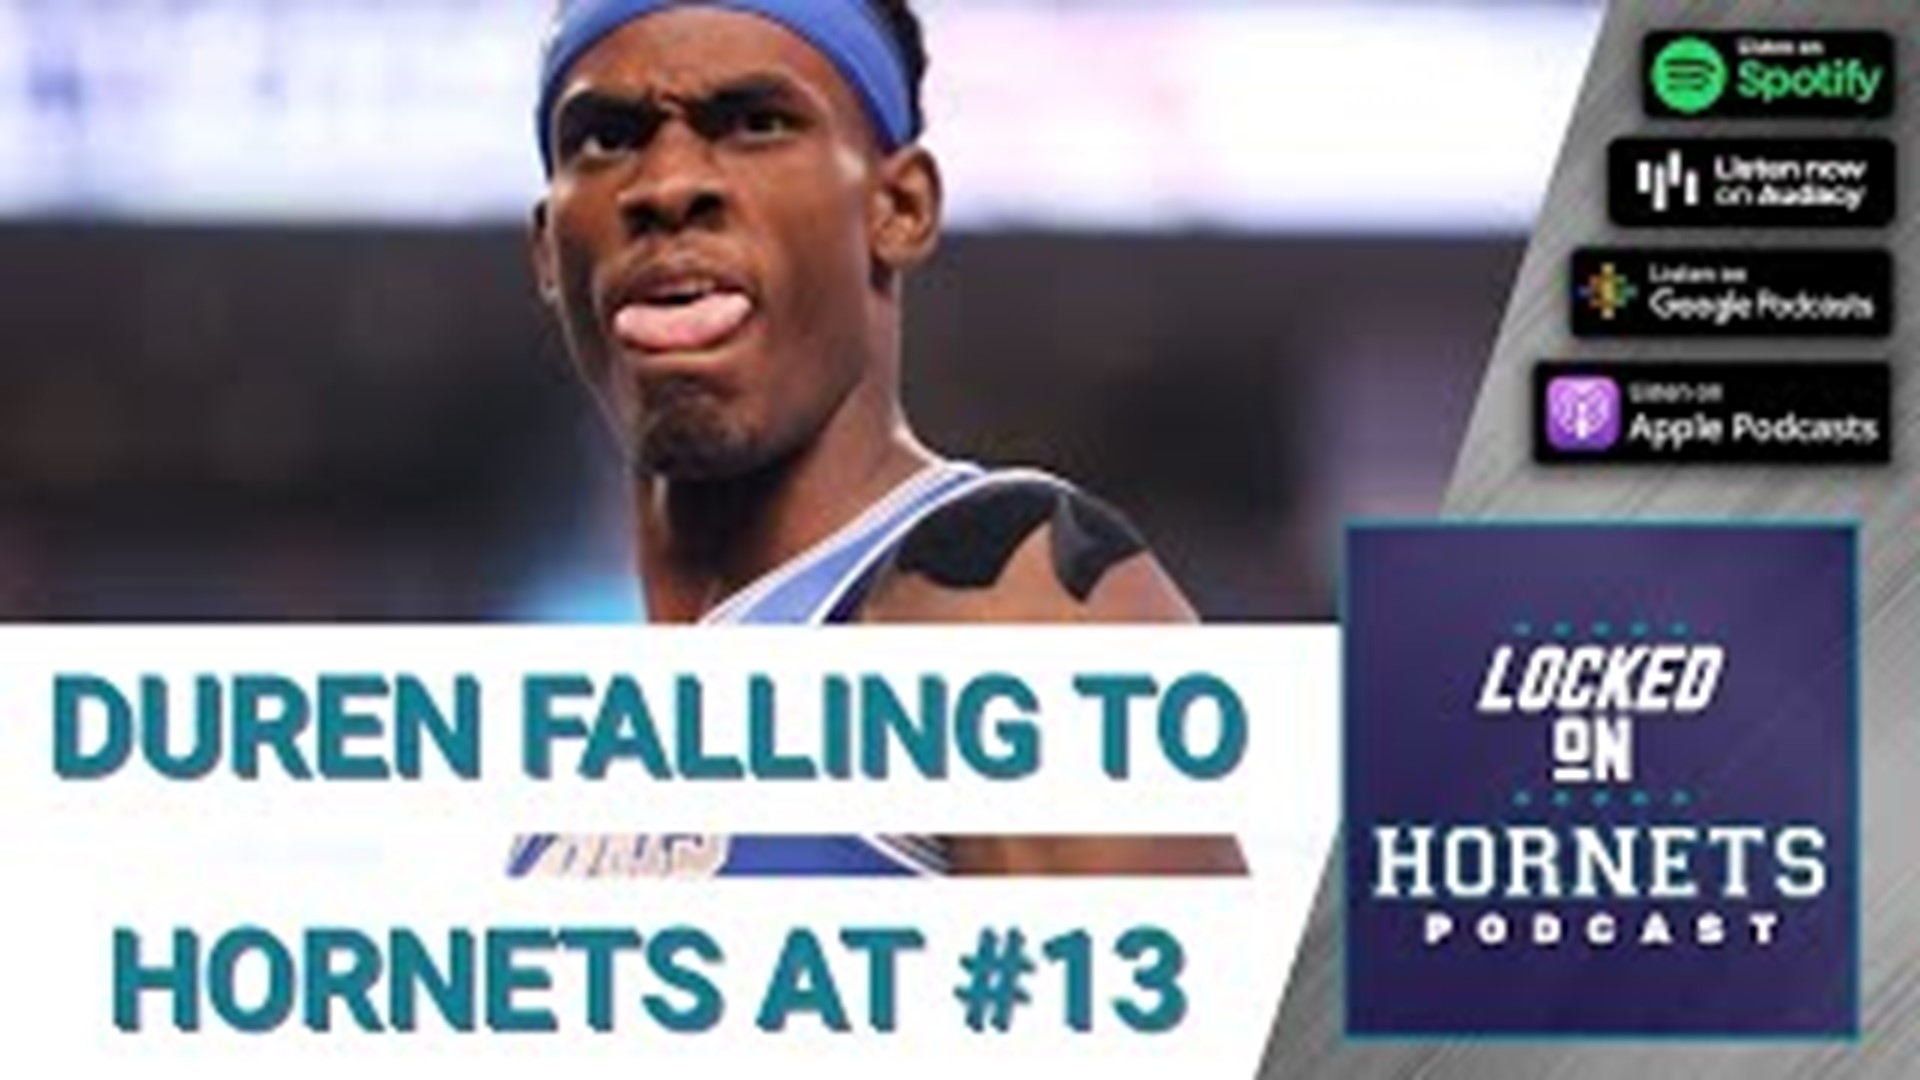 Jalen Duren's draft stock appears to be dropping. Why that's welcome news to the Hornets who also own pick #13. That and more on Locked On Hornets!